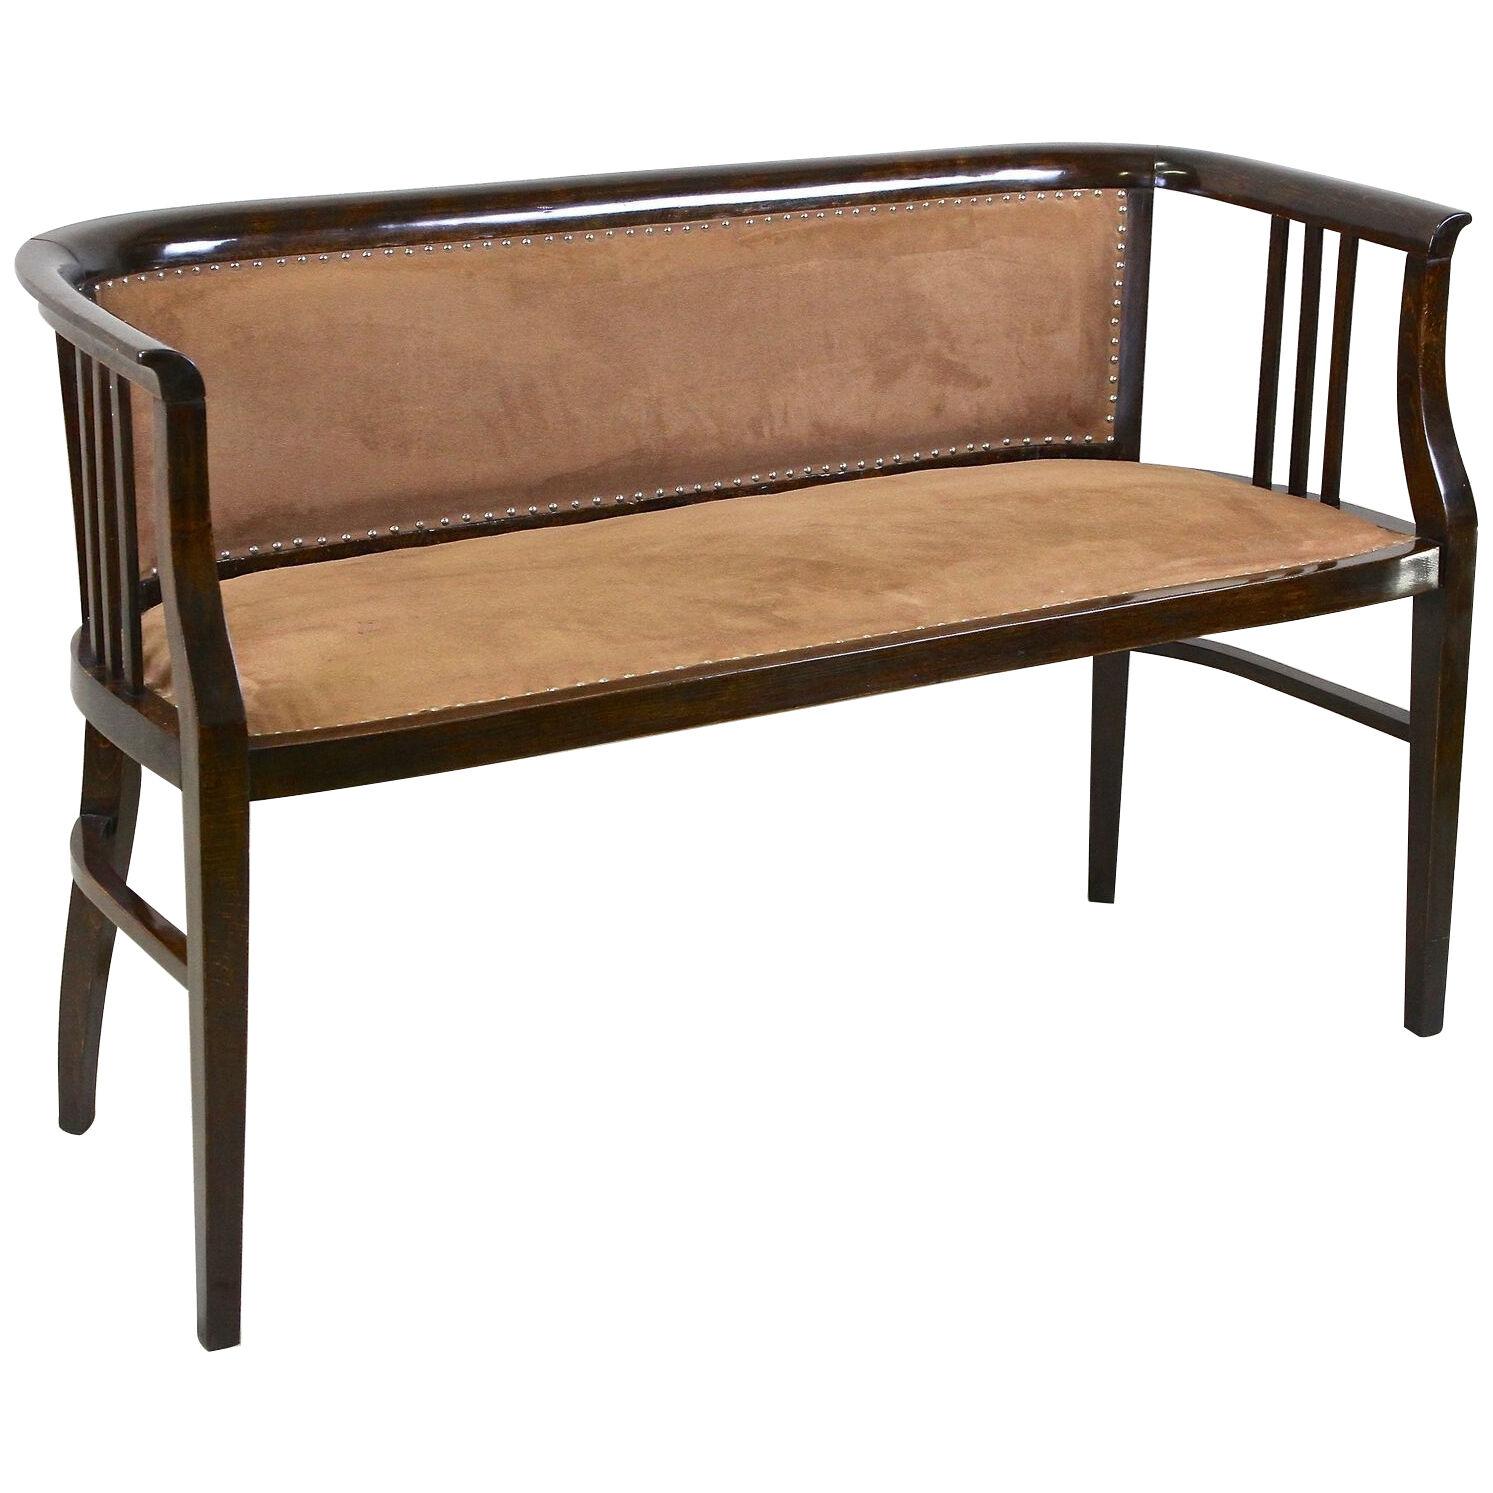 20th Century Art Nouveau Bentwood Bench - newly upholstered, Austria circa 1910